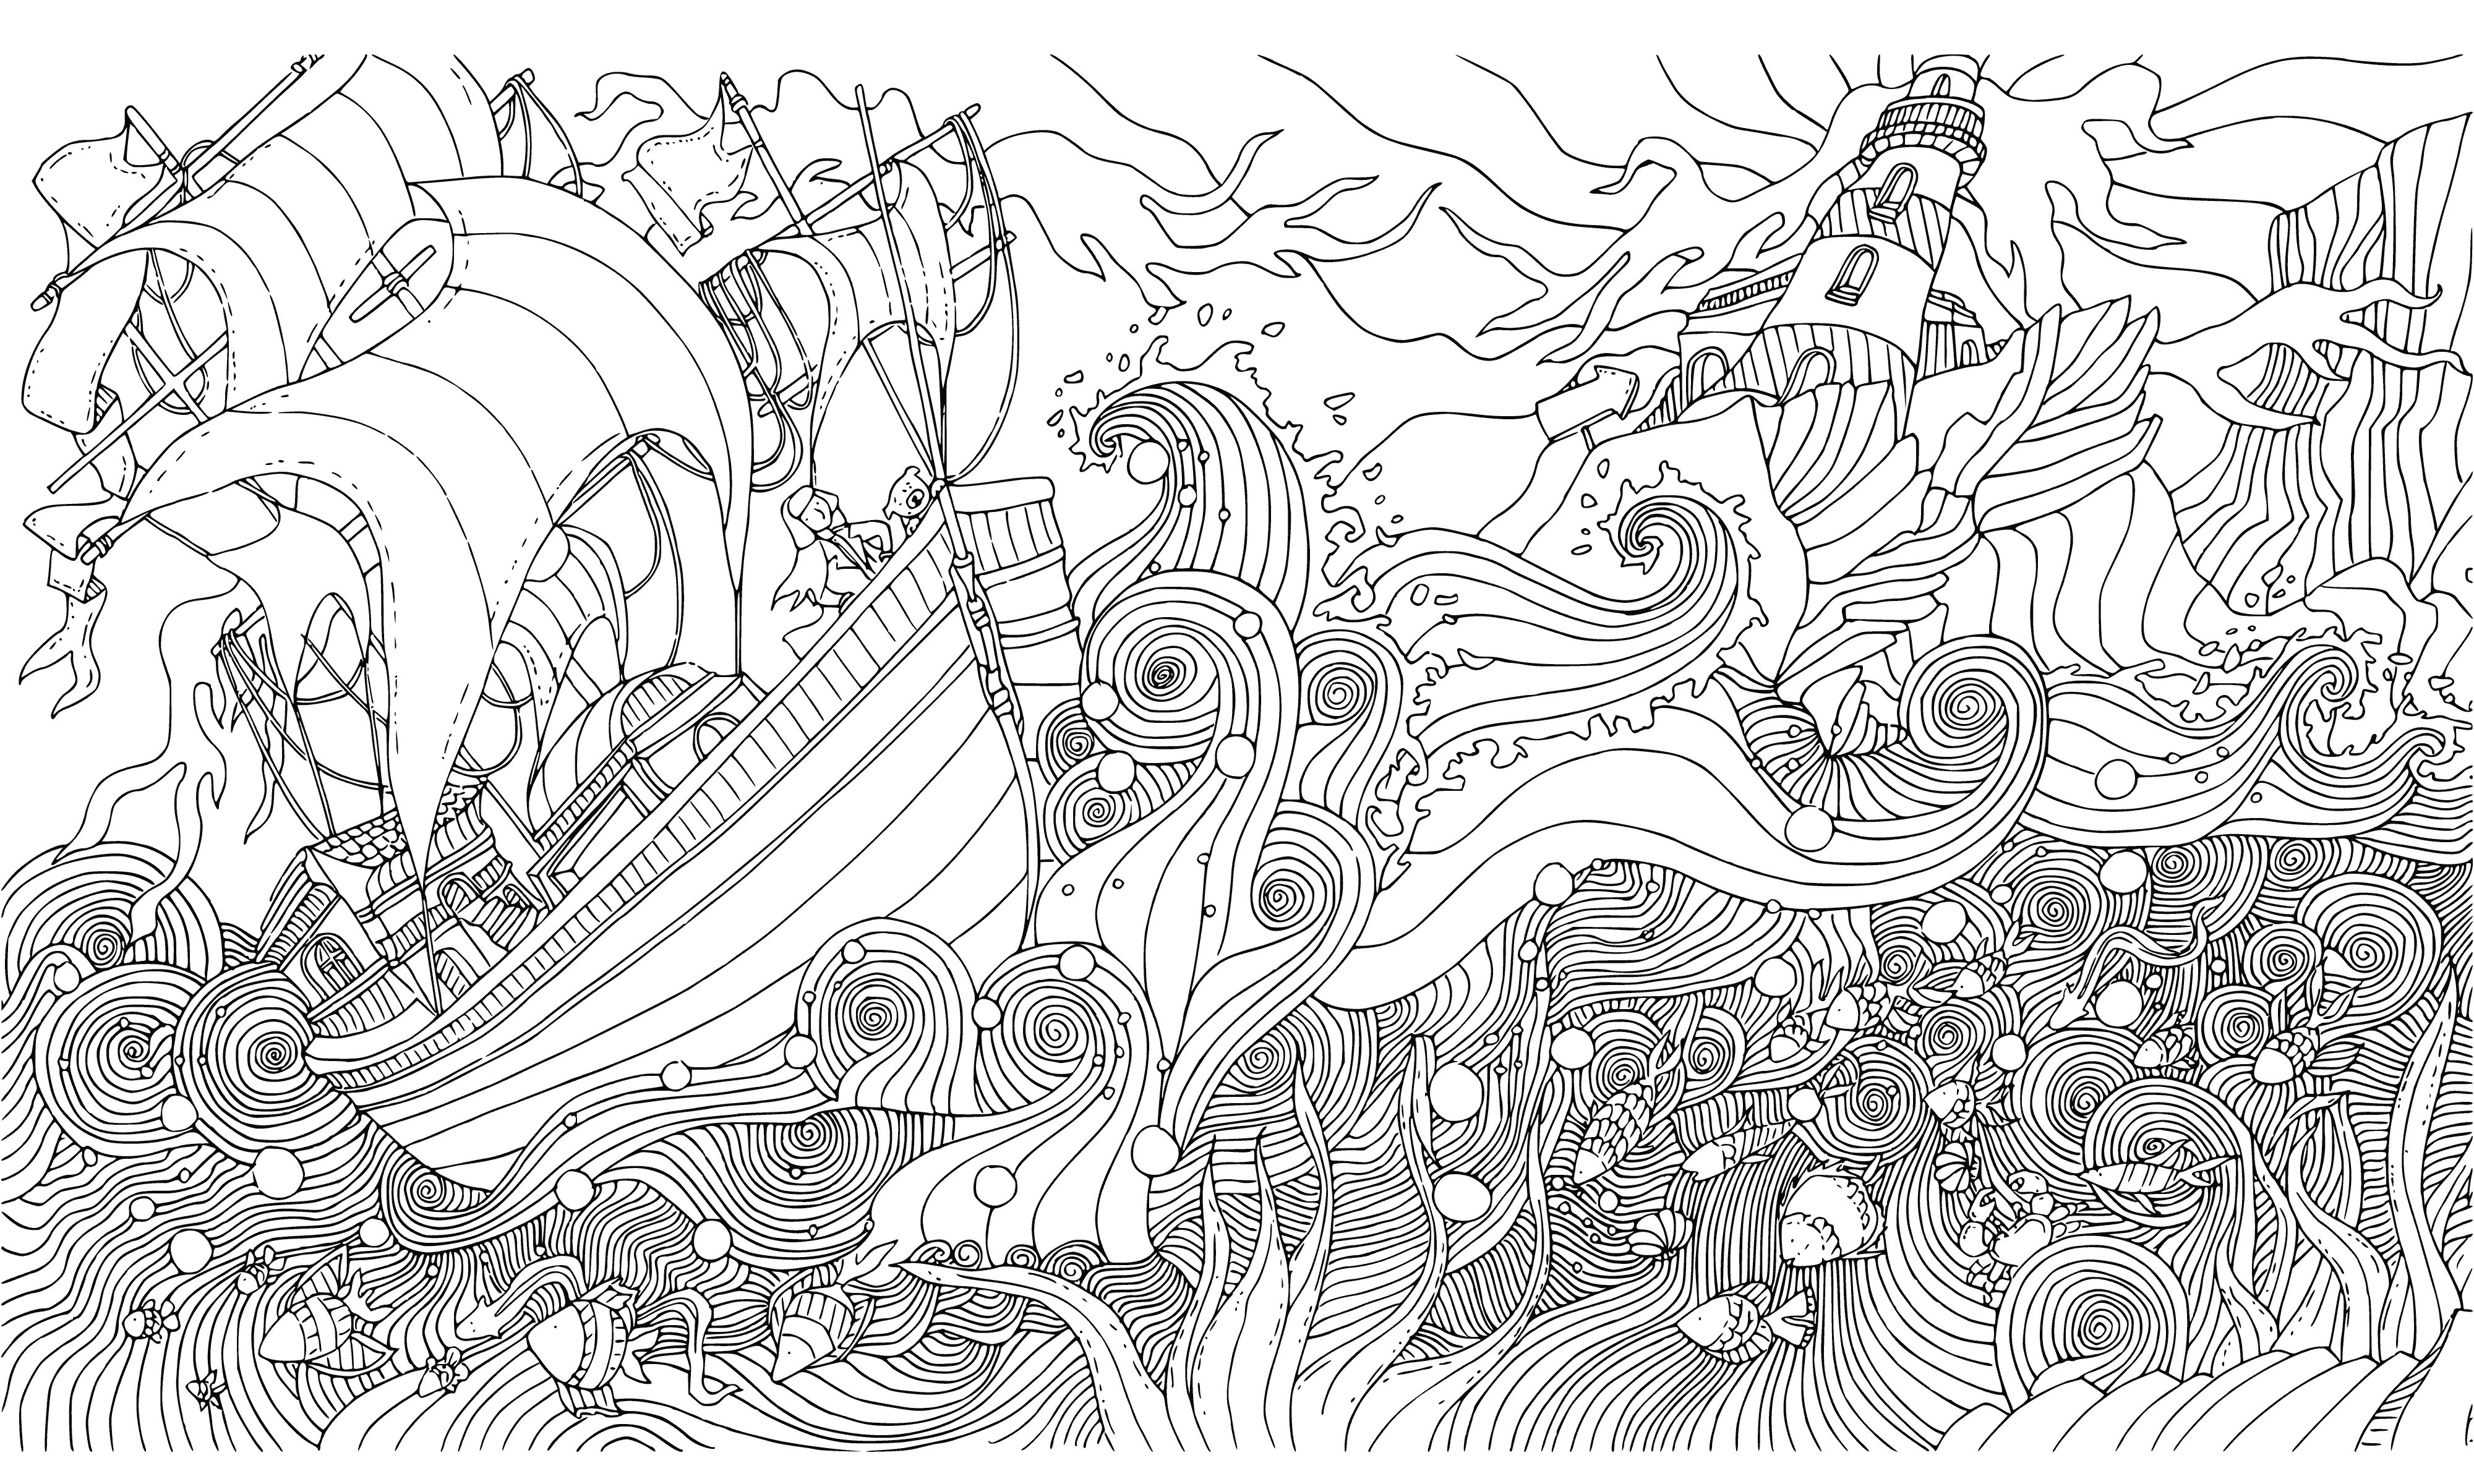 coloring page: Calm and stress-free coloring of a stormy sea scene; waves crashing, wind blowing trees. #adultcoloring #AntiStress